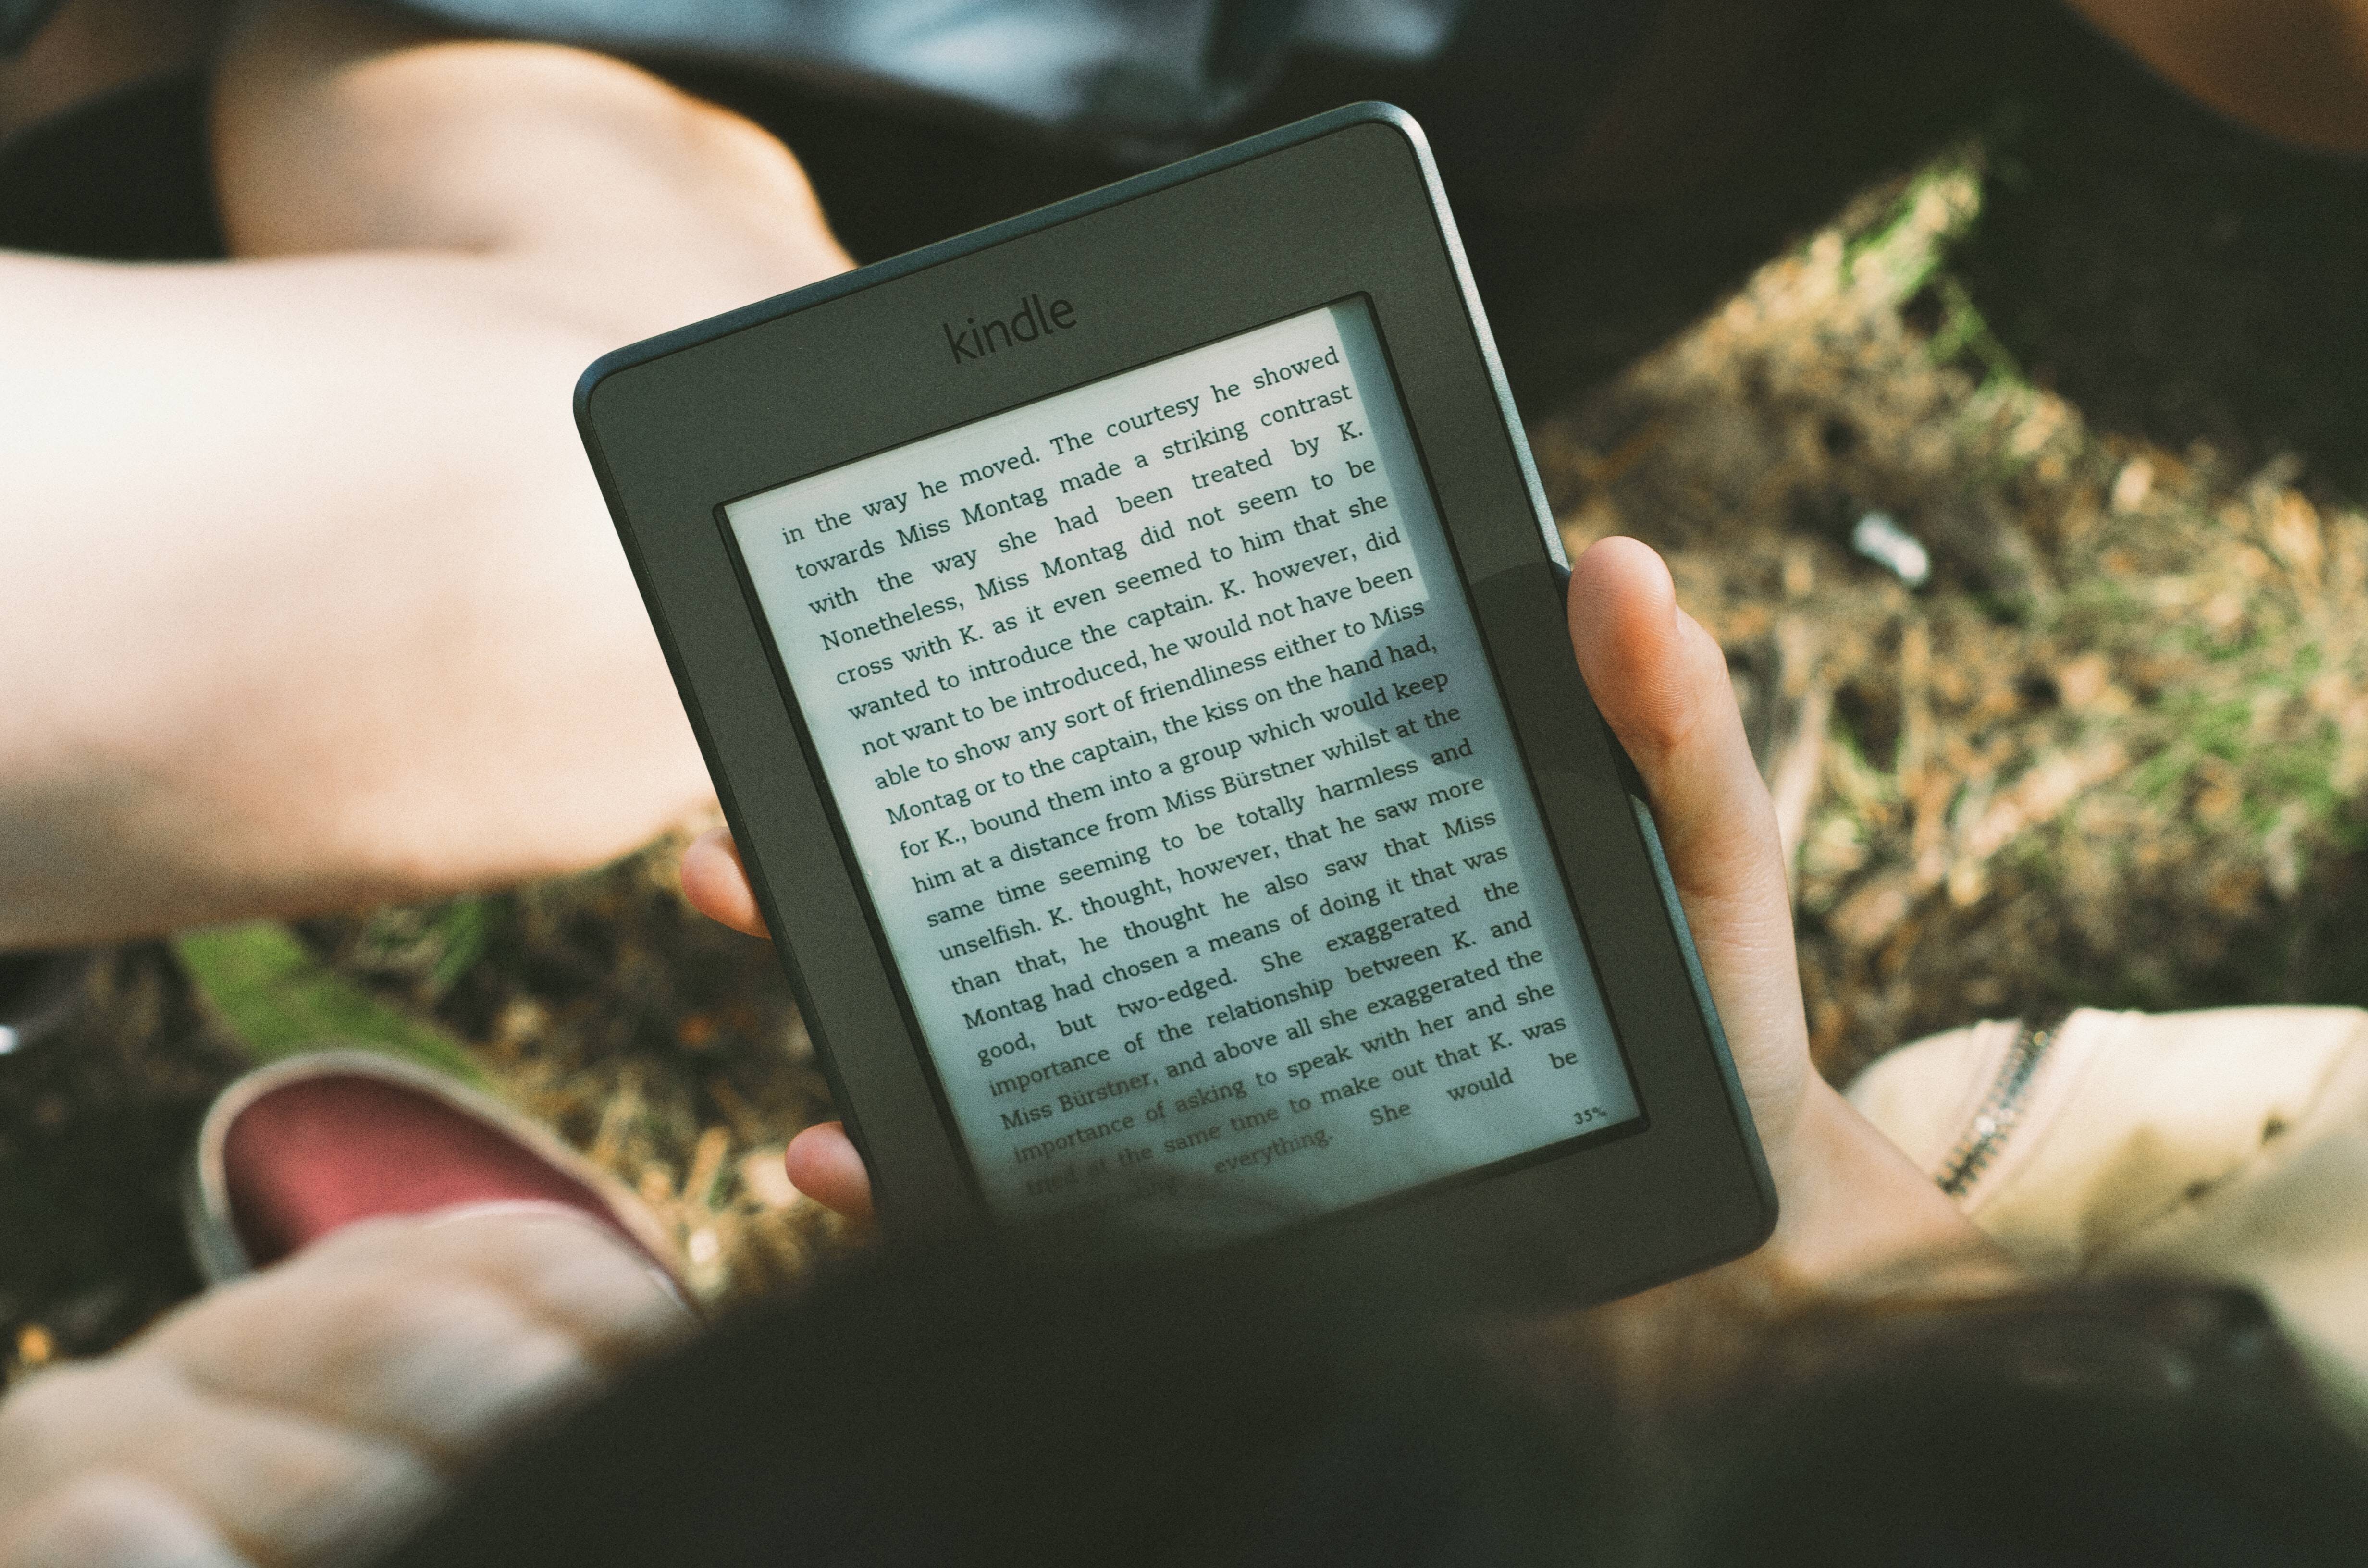 Kindle or Books? A book lover’s battle